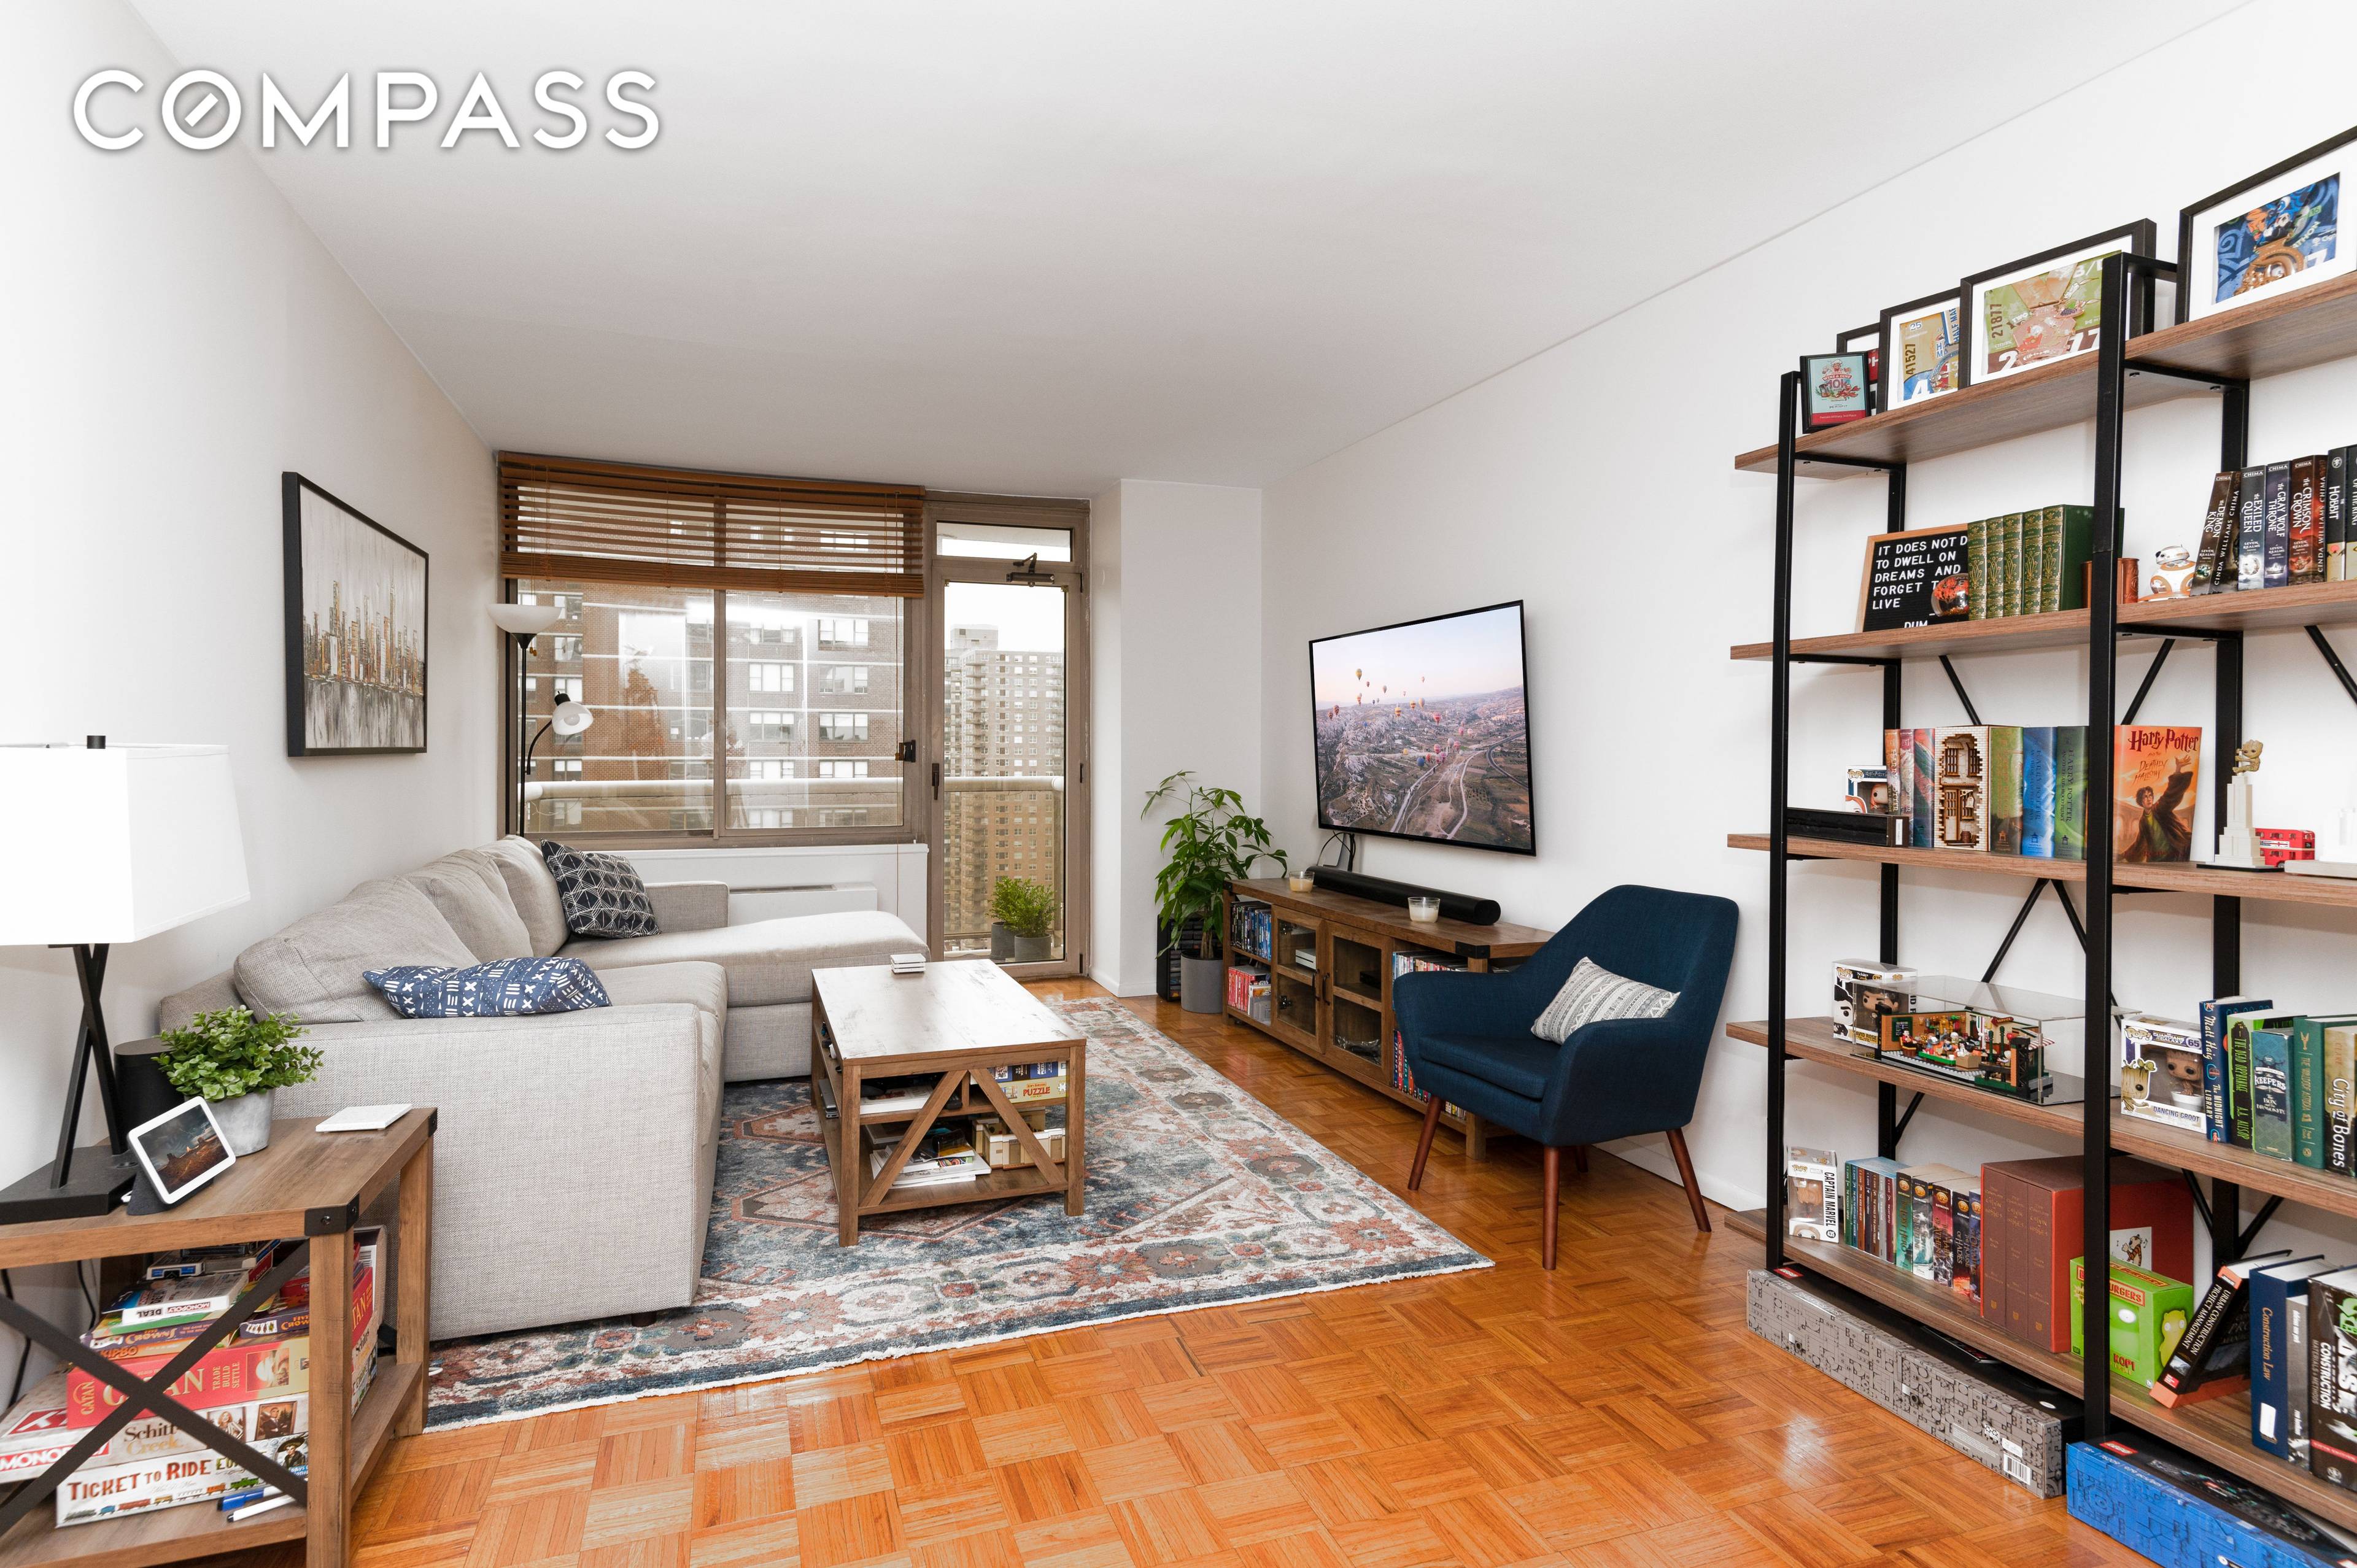 New on the market ! Extremely sunny and bright south facing high floor one bedroom condominium with private balcony featuring beautiful open city Manhattan skyline views.